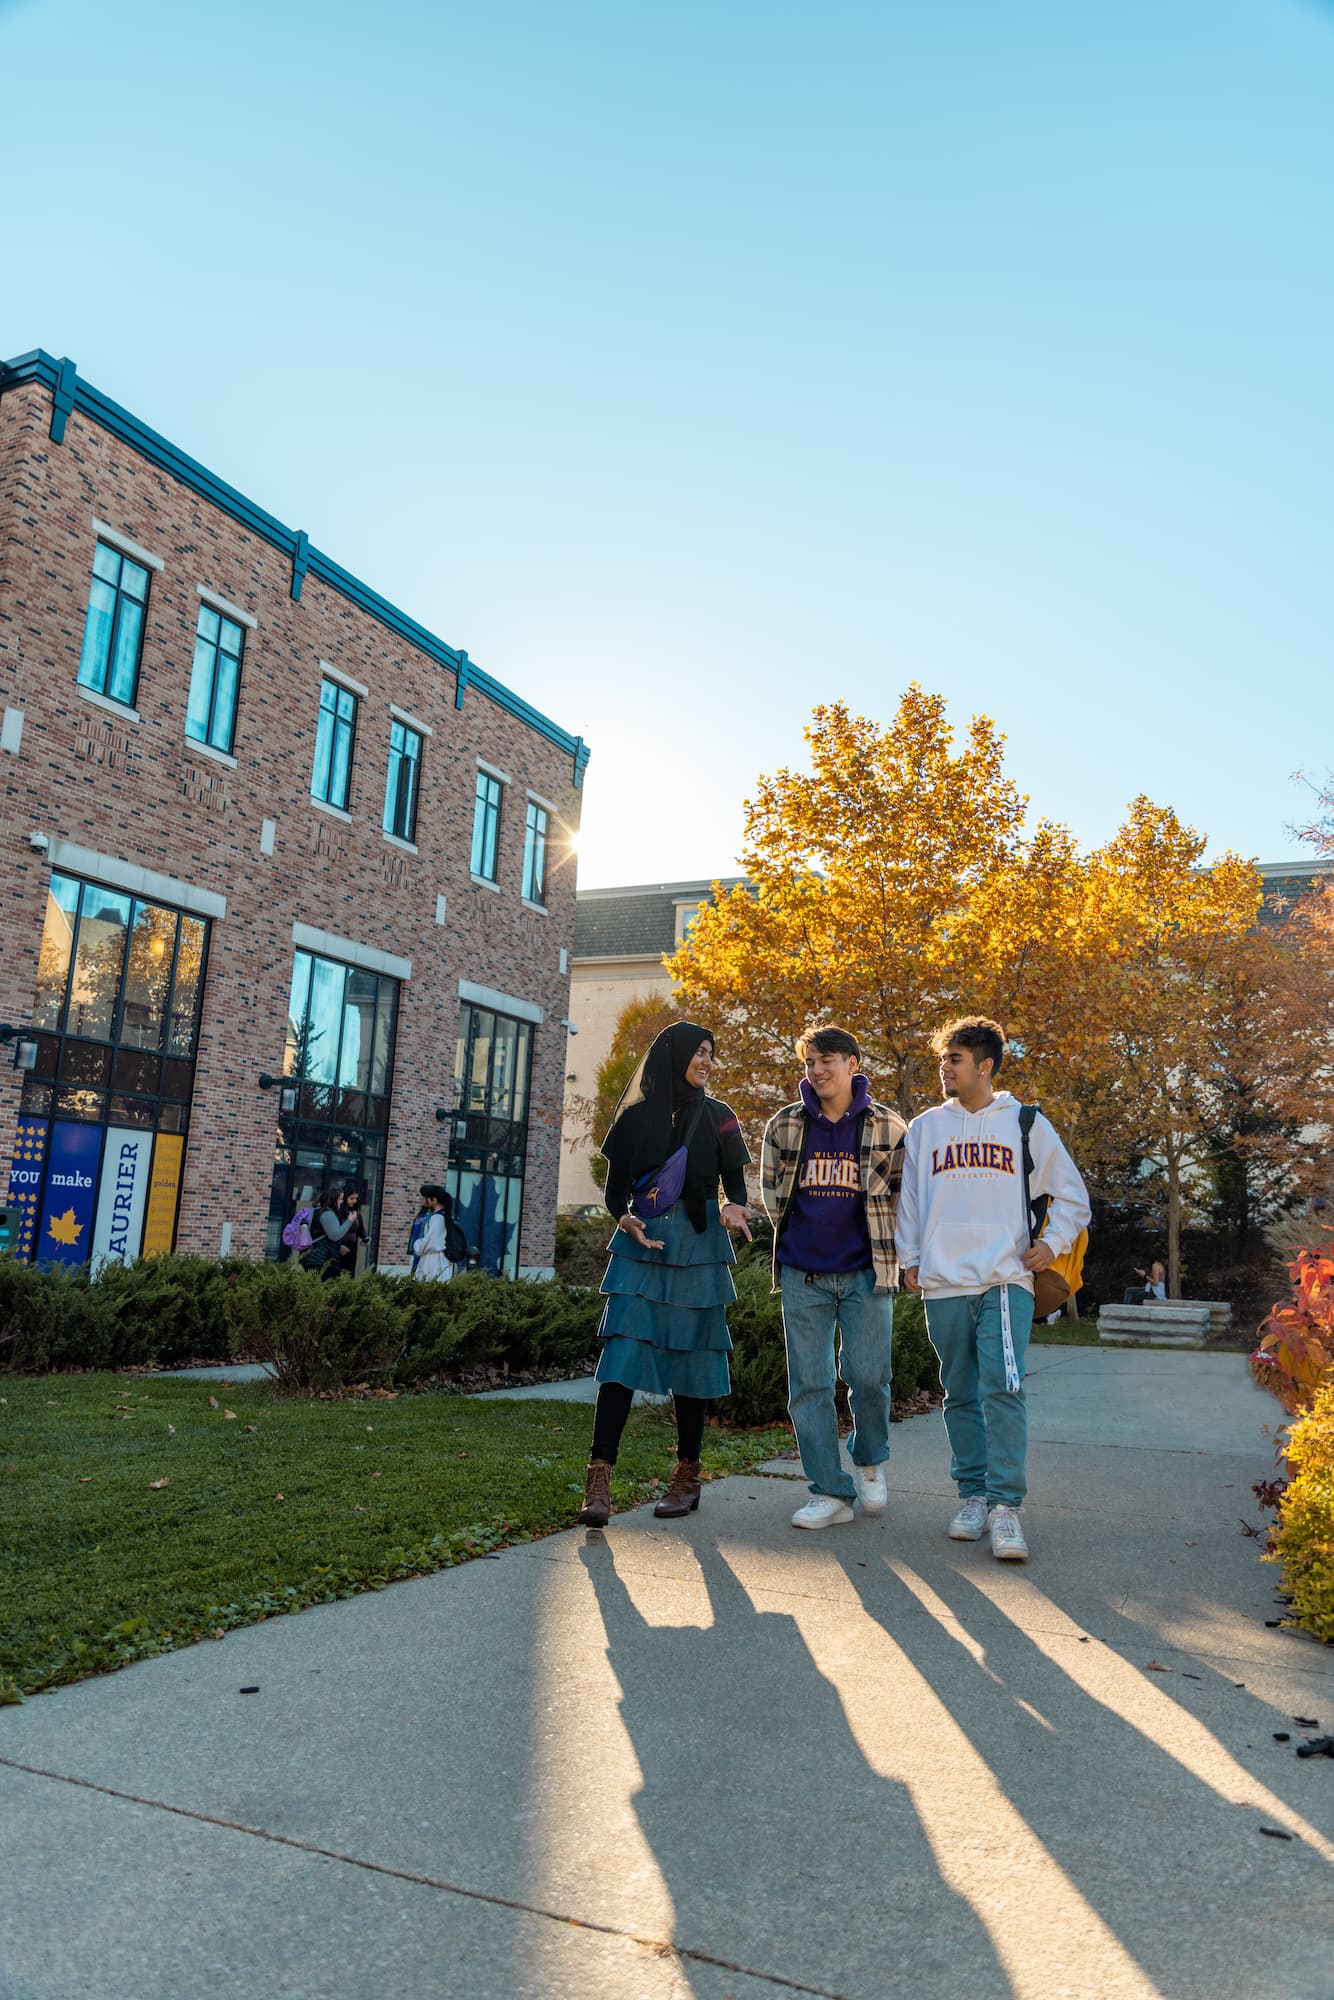 Students outside in autumn, Brantford campus